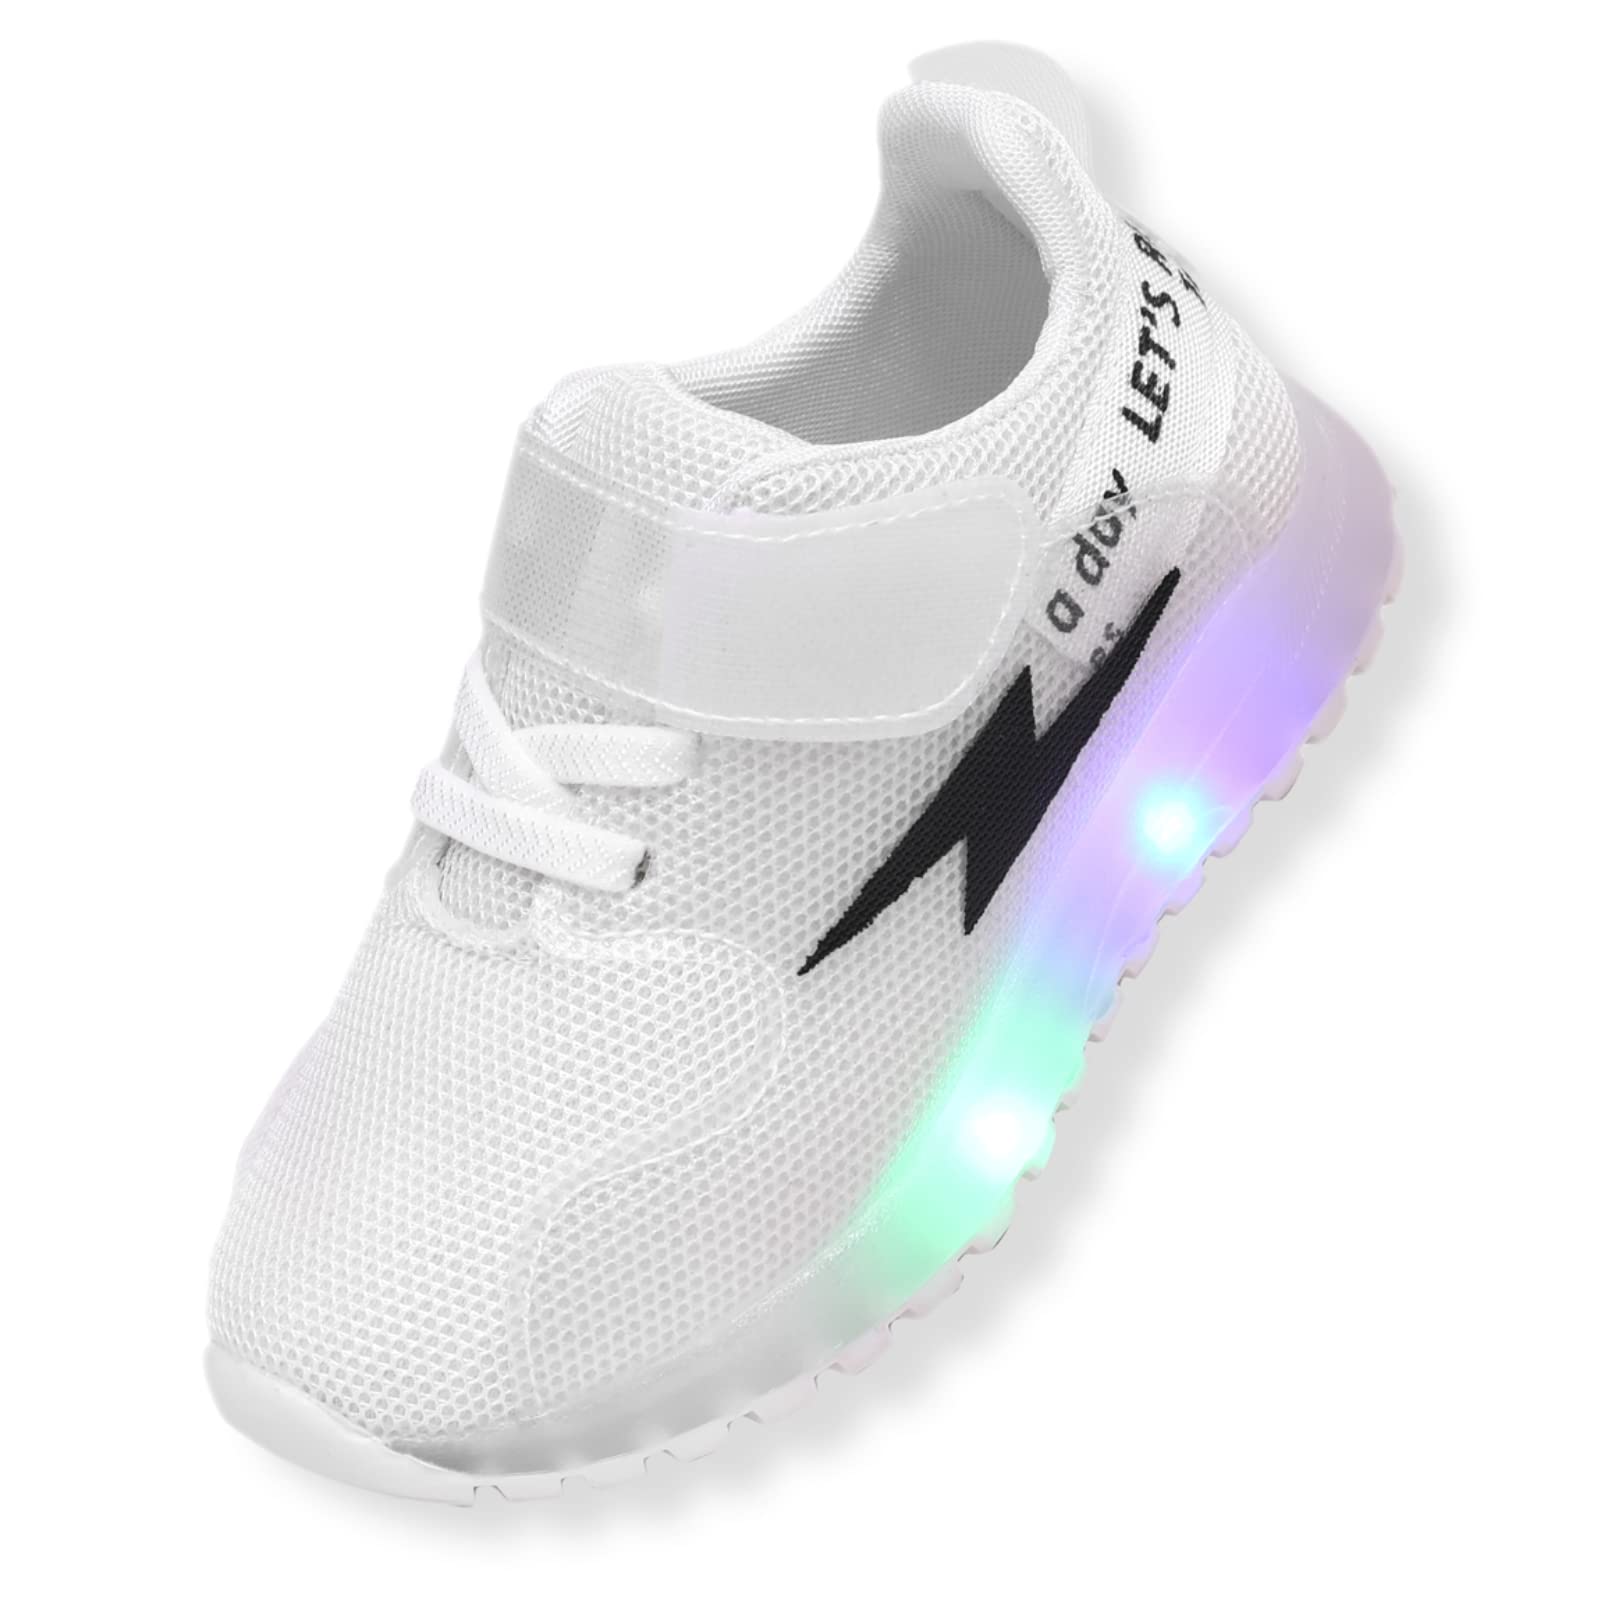 PATPAT Toddler Shoes Kid Shoes with LED Light Up Shoes Shiny Toddler Sneakers Girl Shoes Light Up Shoes for Girls Boys for Christmas Birthday Children Show Gift